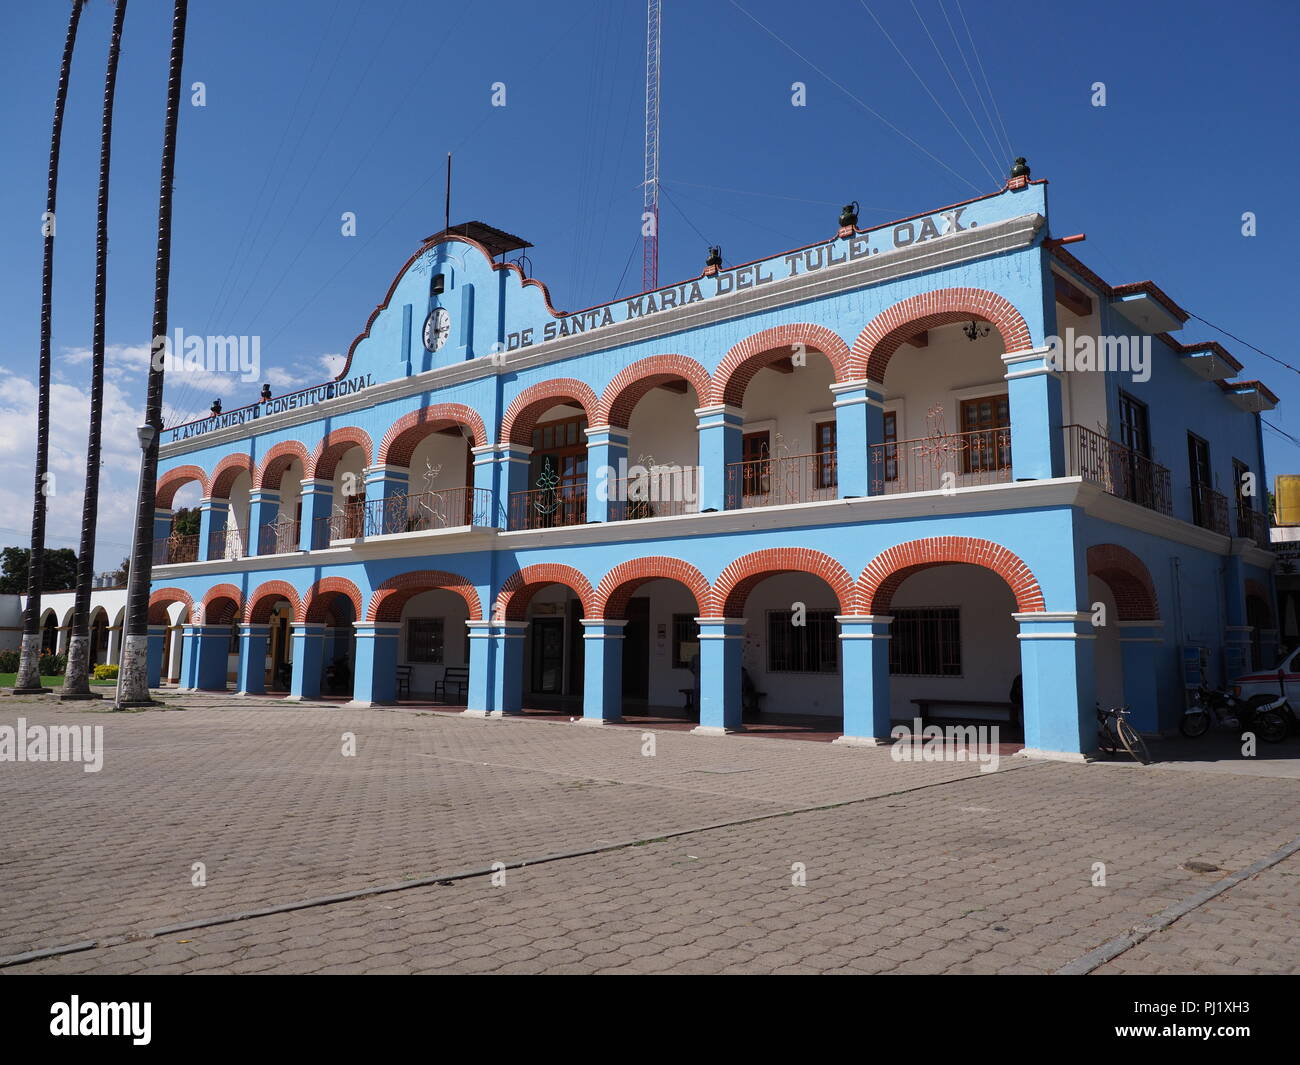 SANTA MARIA del TULE, NORTH AMERICA MEXICO on FEBRUARY 2018: Facade and side of town hall on main market square in mexican city center at Oaxaca state Stock Photo